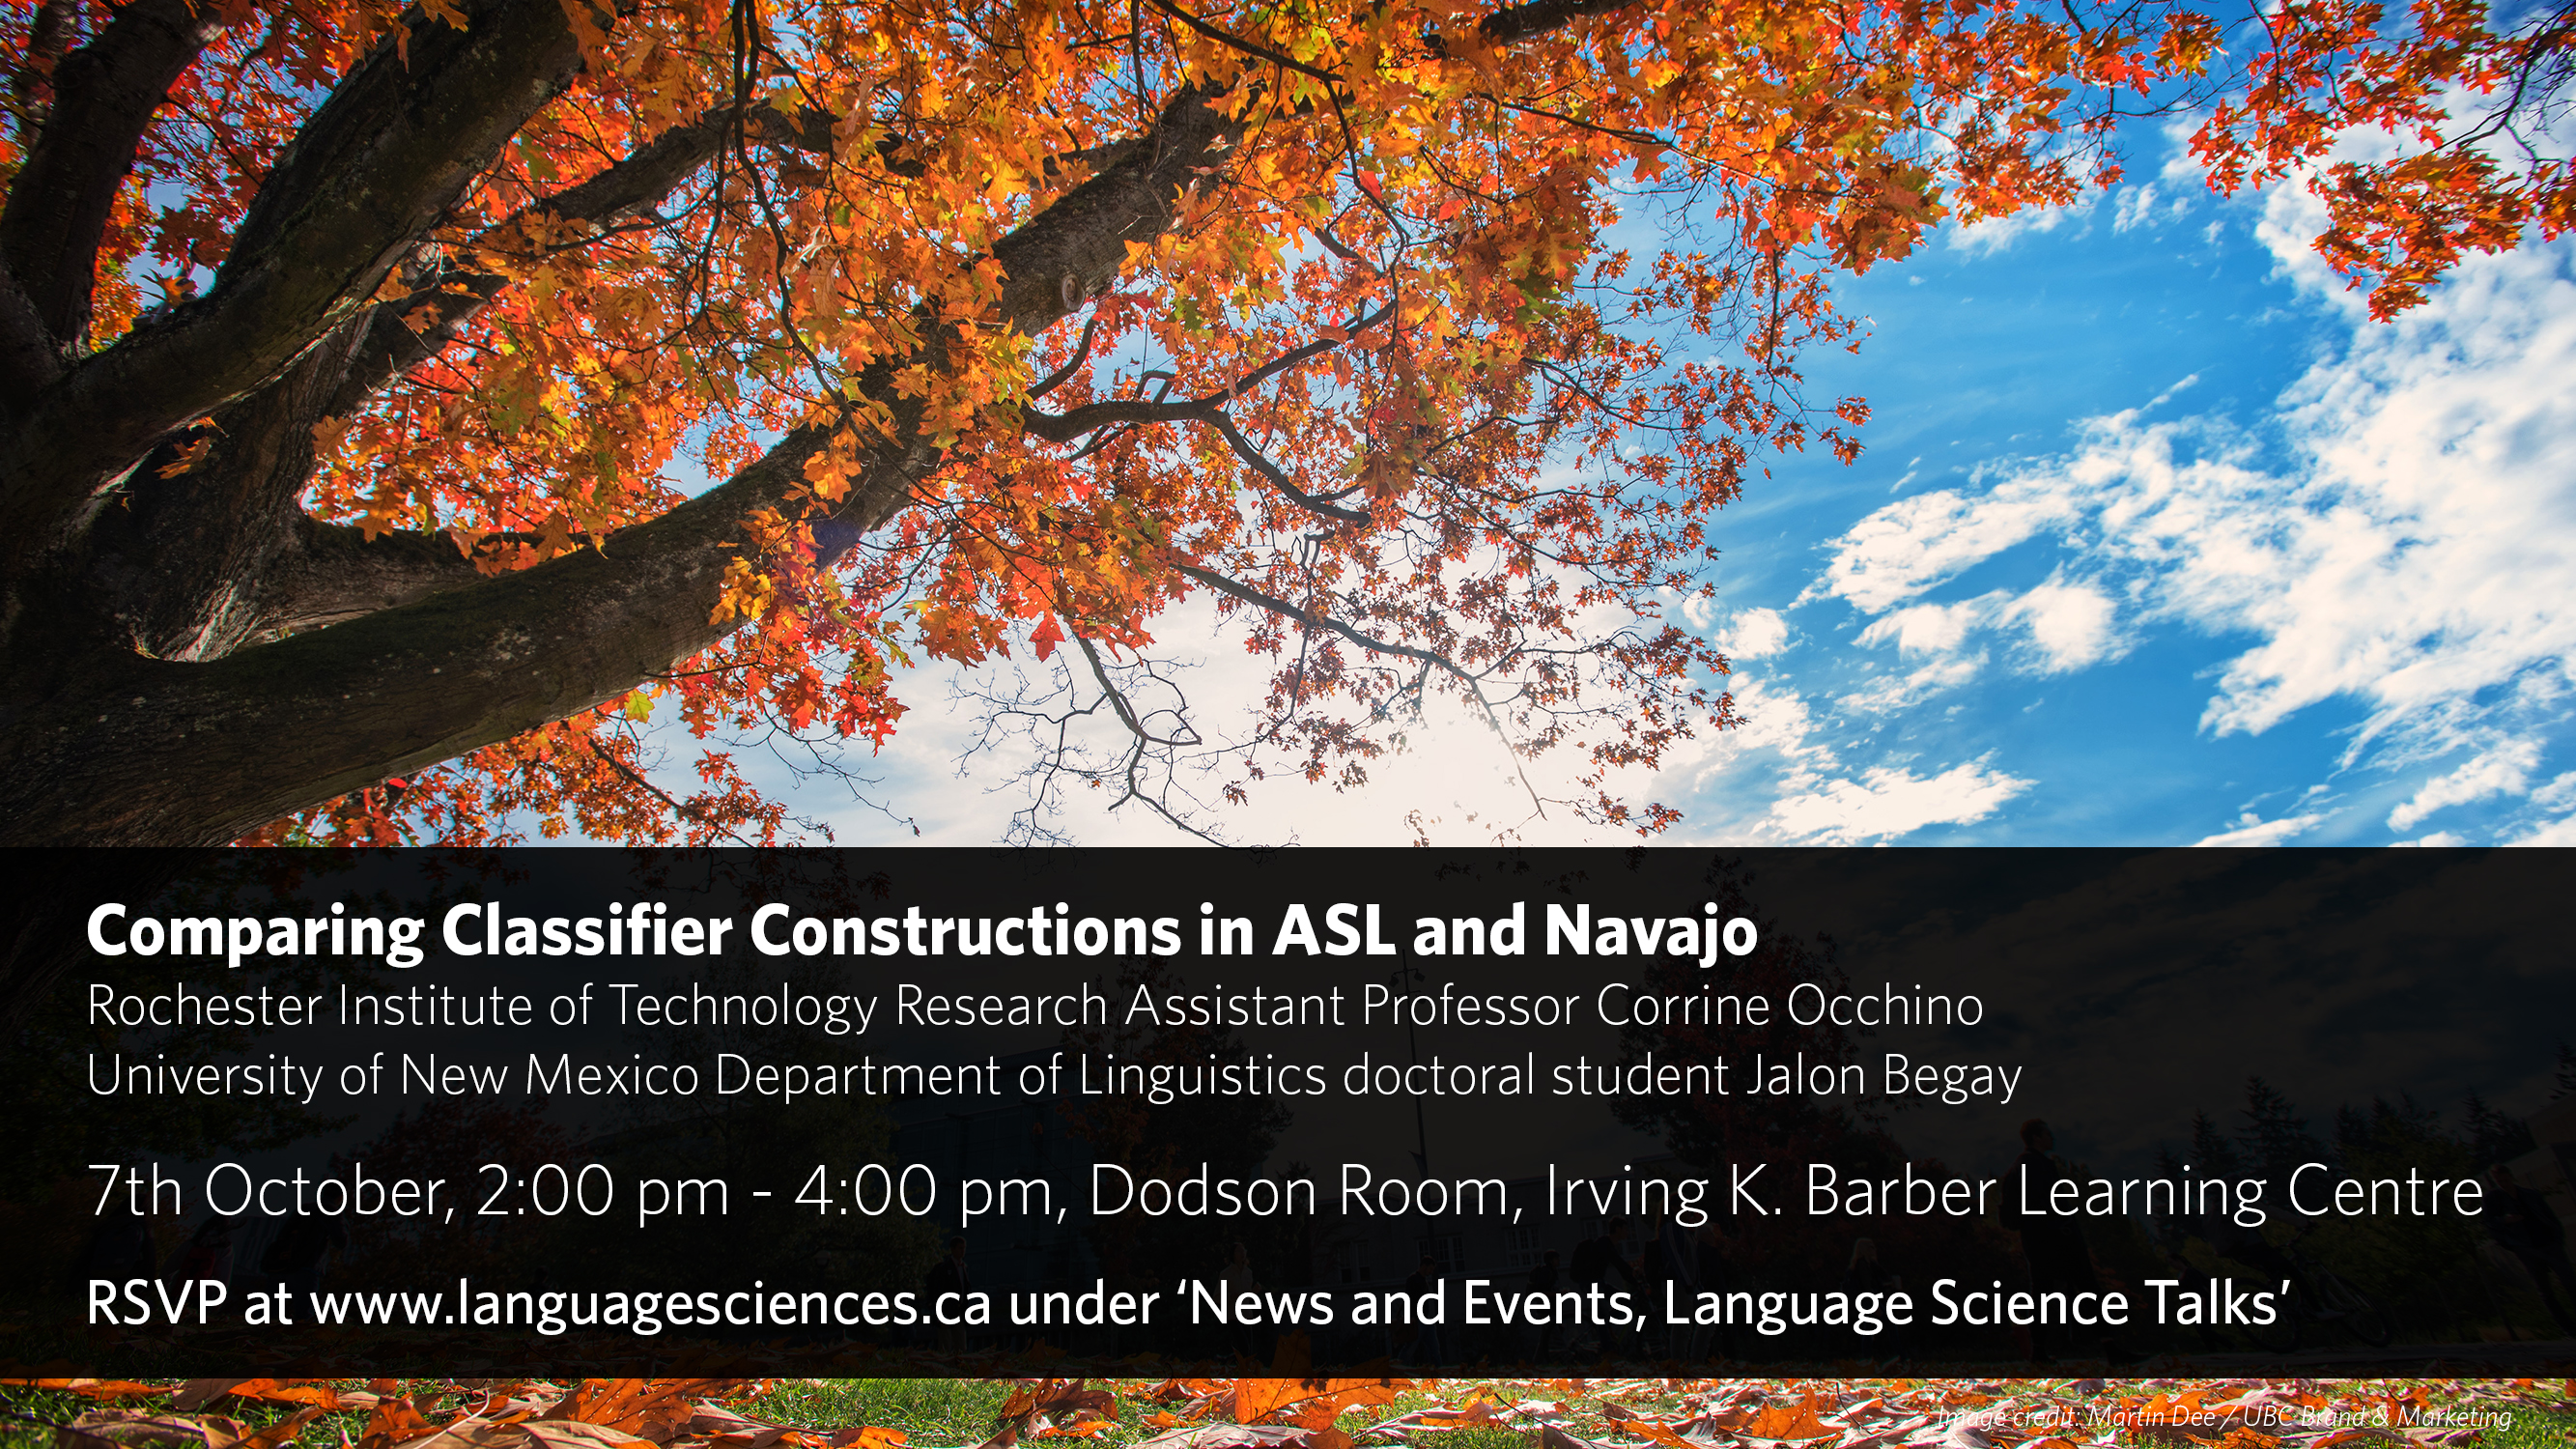 A poster for the talk Comparing Classifier Constructions in ASL and Navajo, featuring event information and a picture of an oak tree in autumn, with red and orange leaves, against a blue sky with white clouds